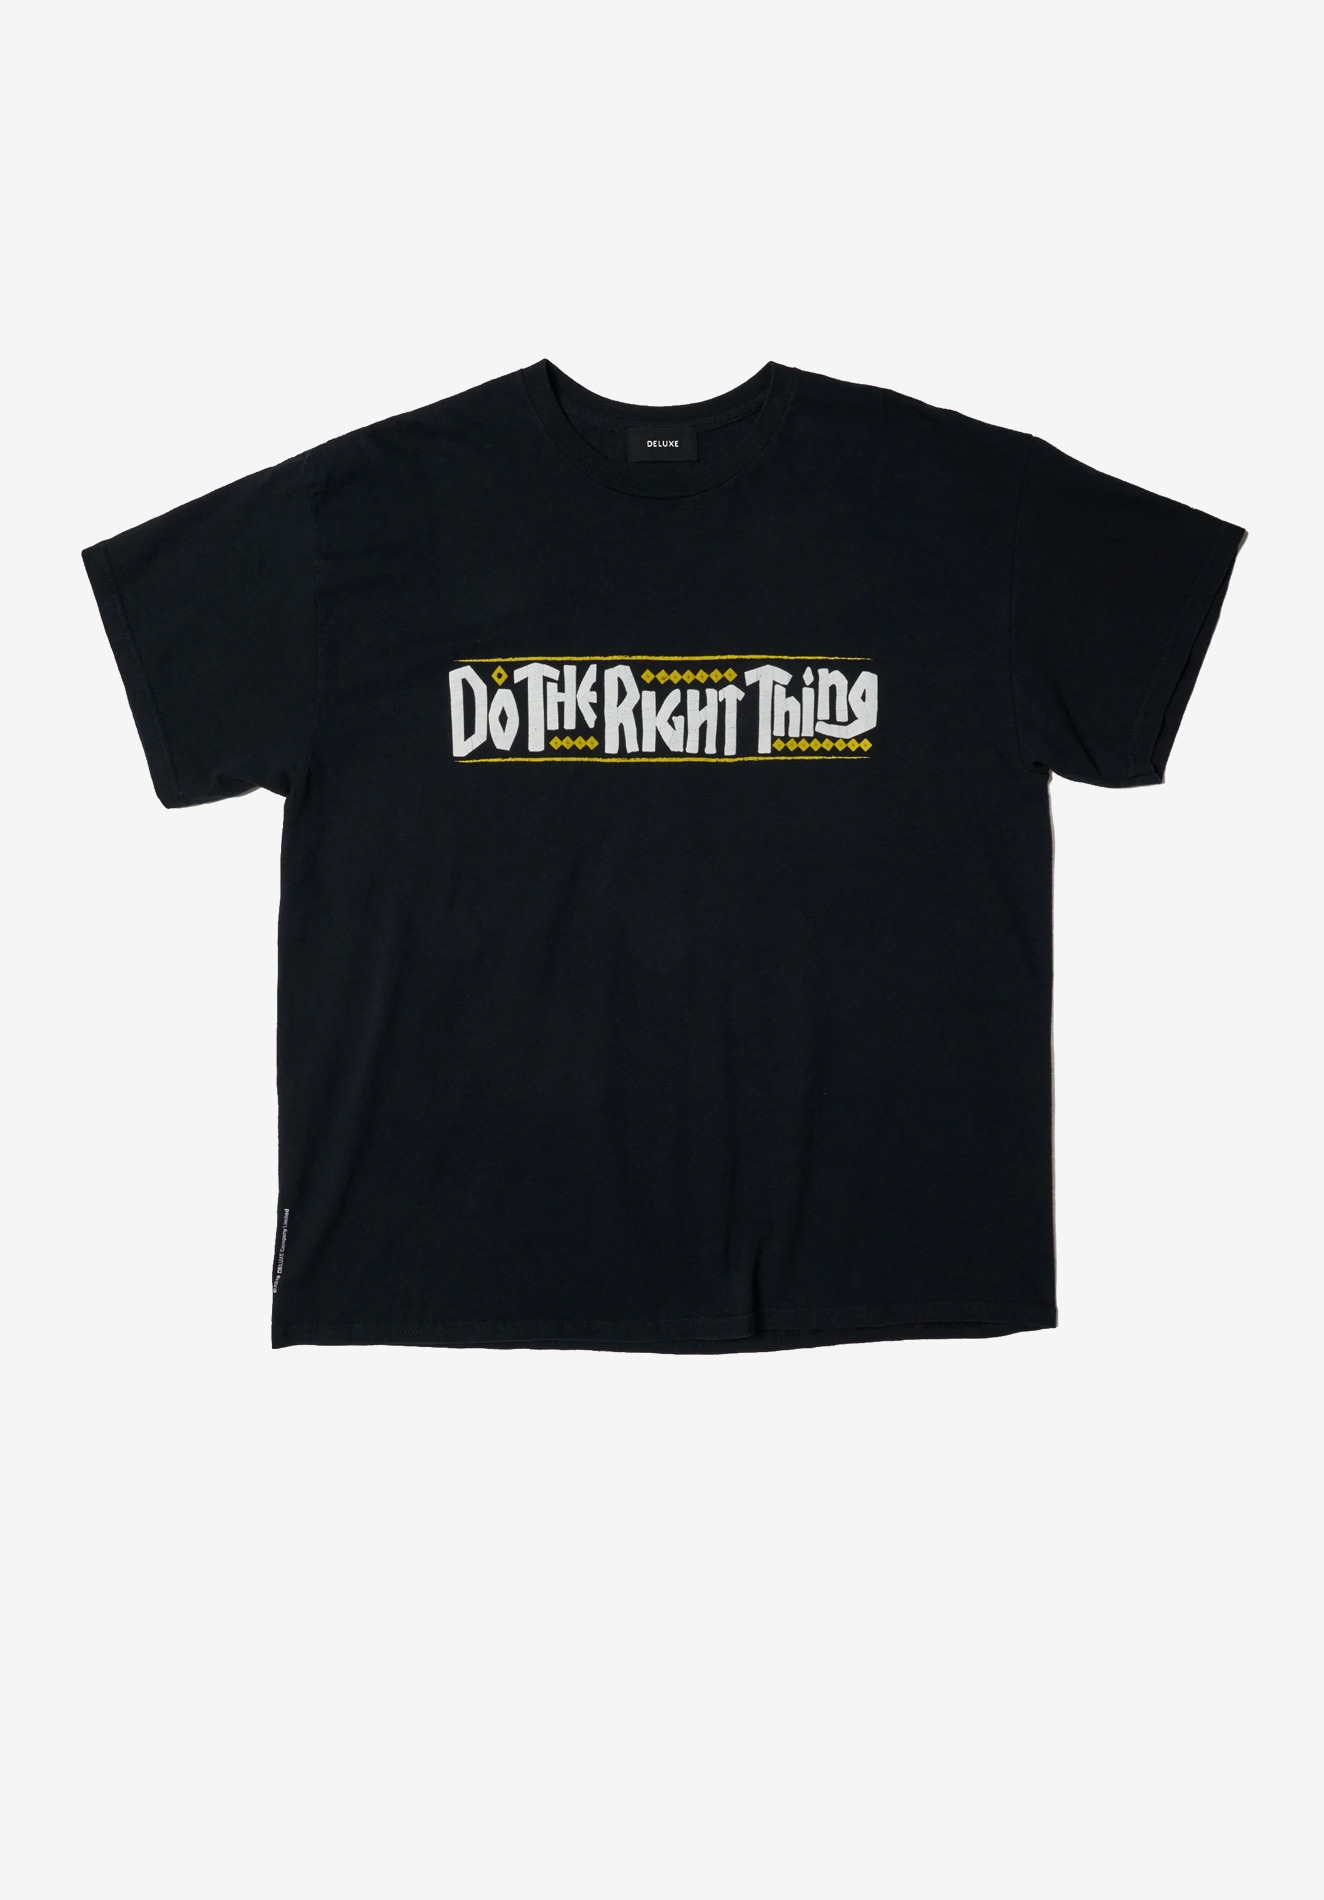 Do the right thing x DELUXE TEE, BLACK